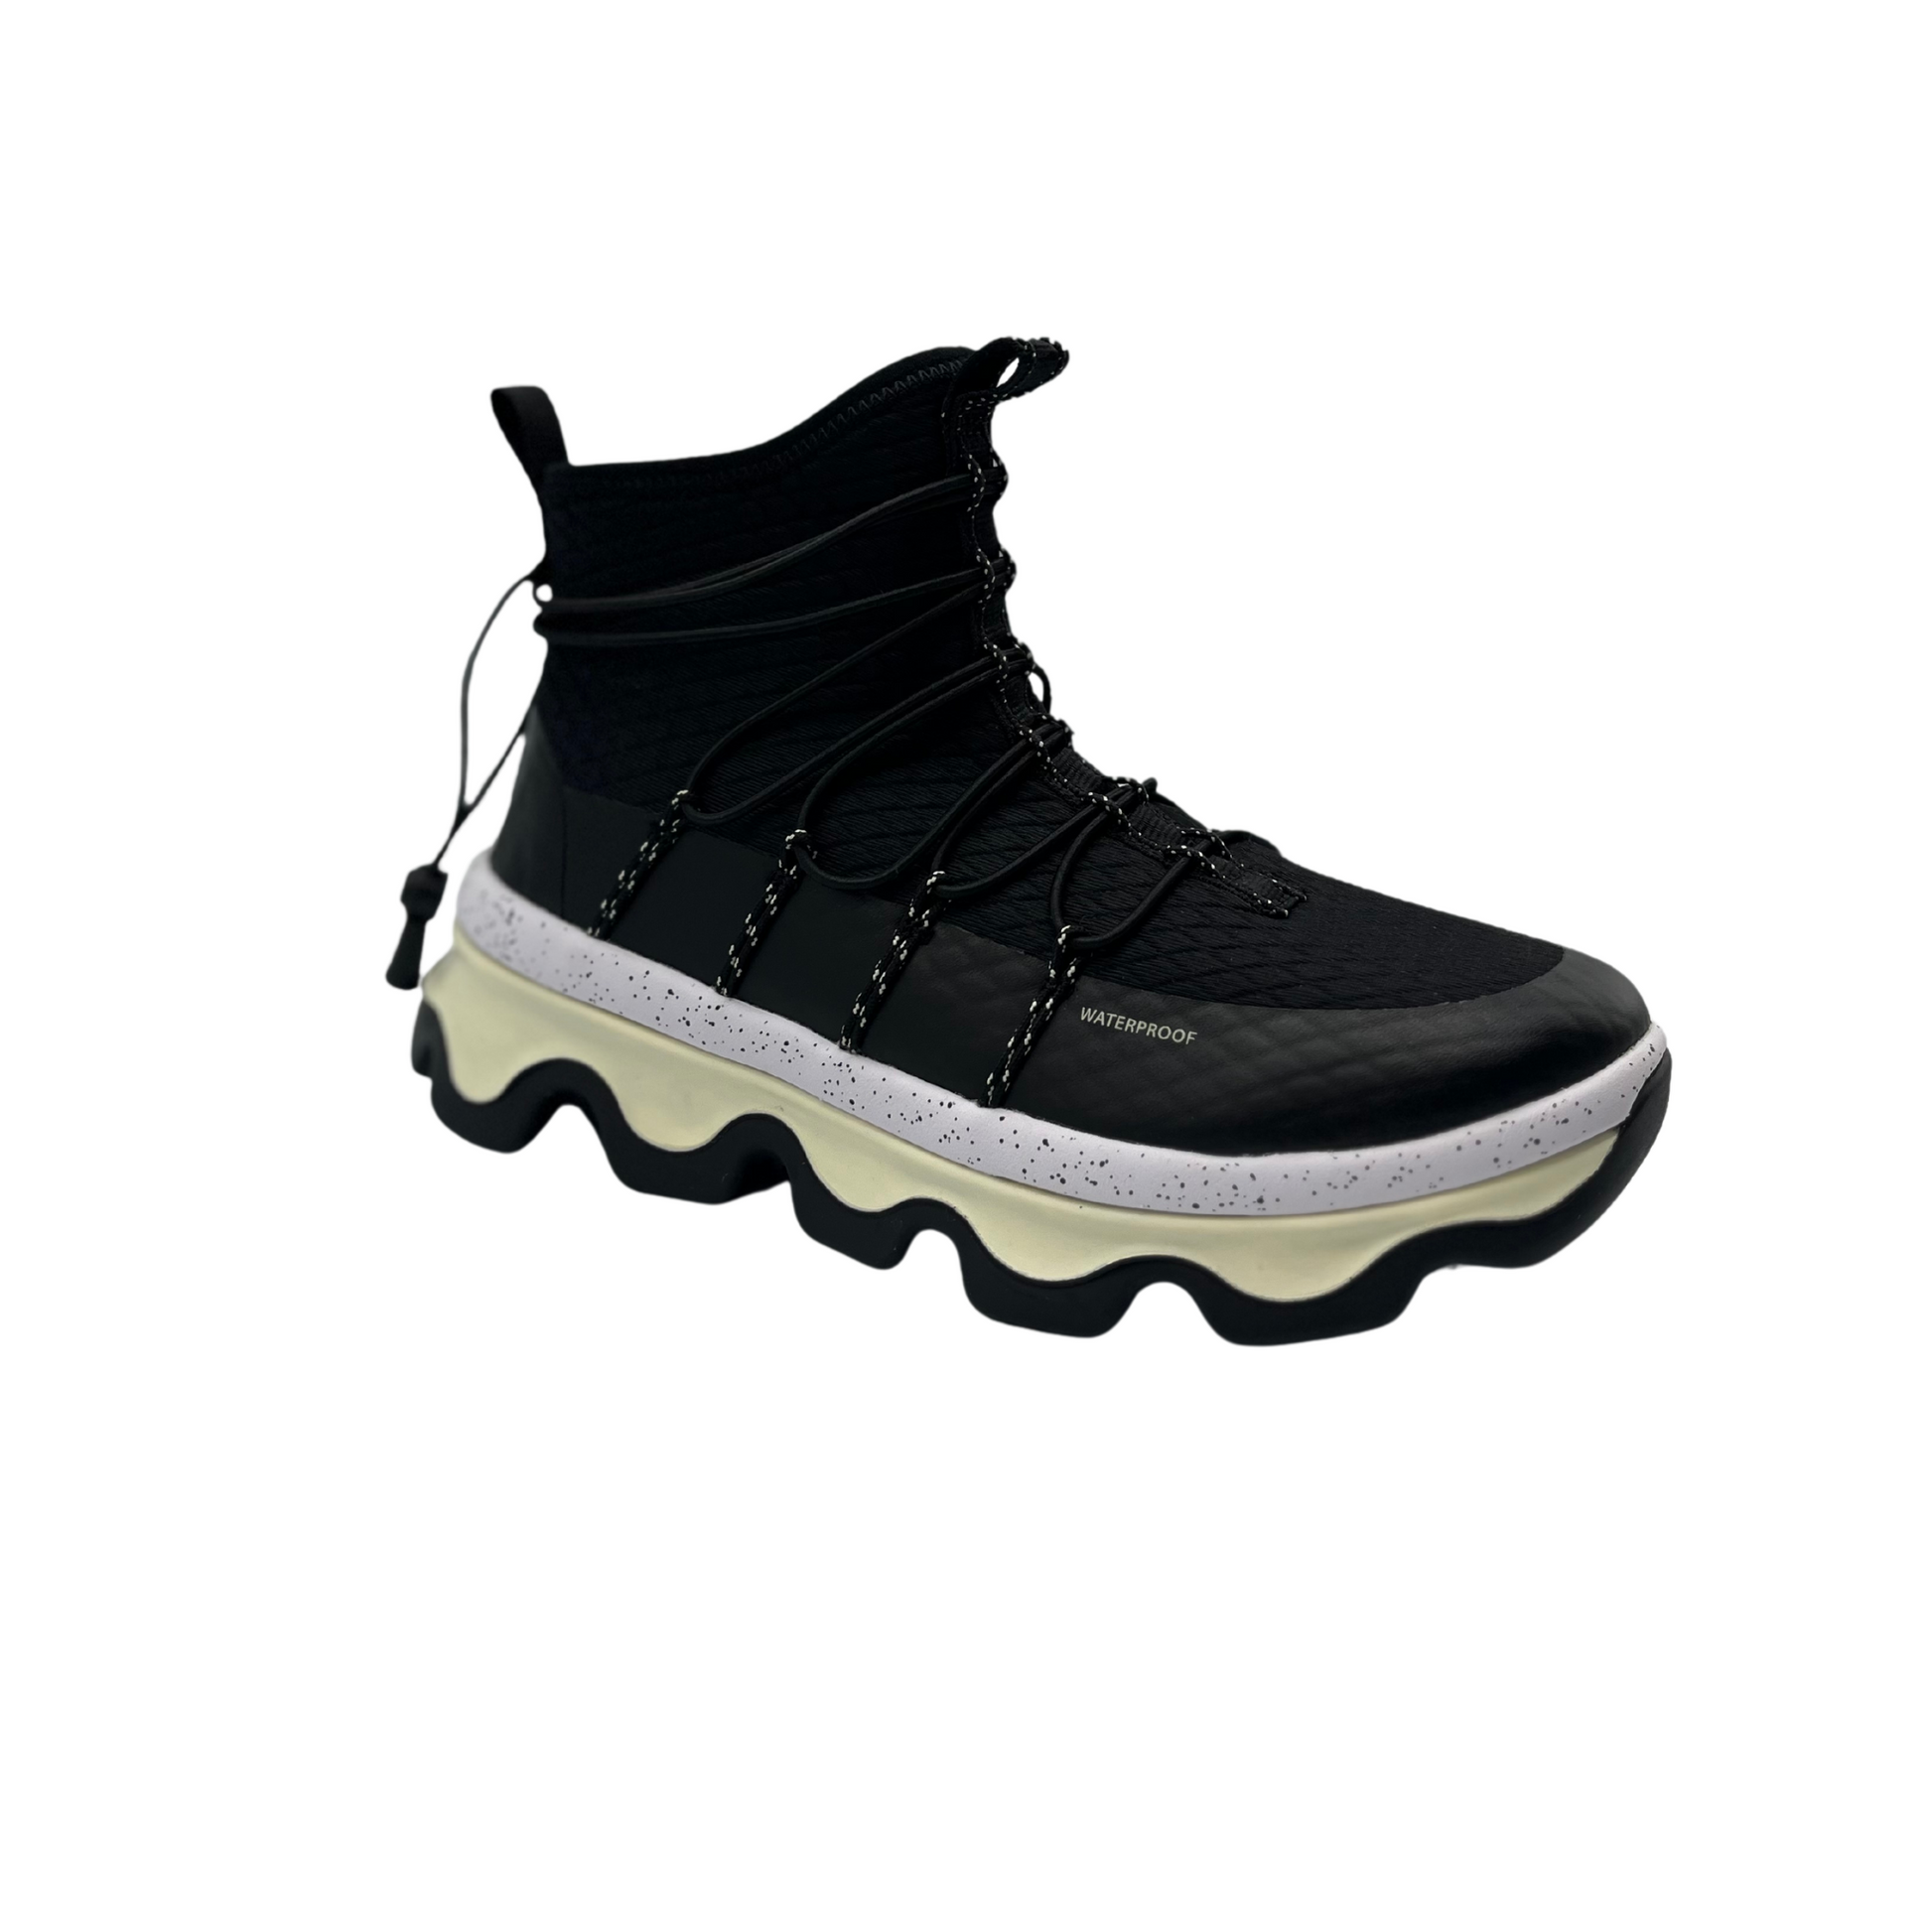 Oe black boot is pictured in profile with egg carton inspired sole.The boot has toggle laces for easy on and off.